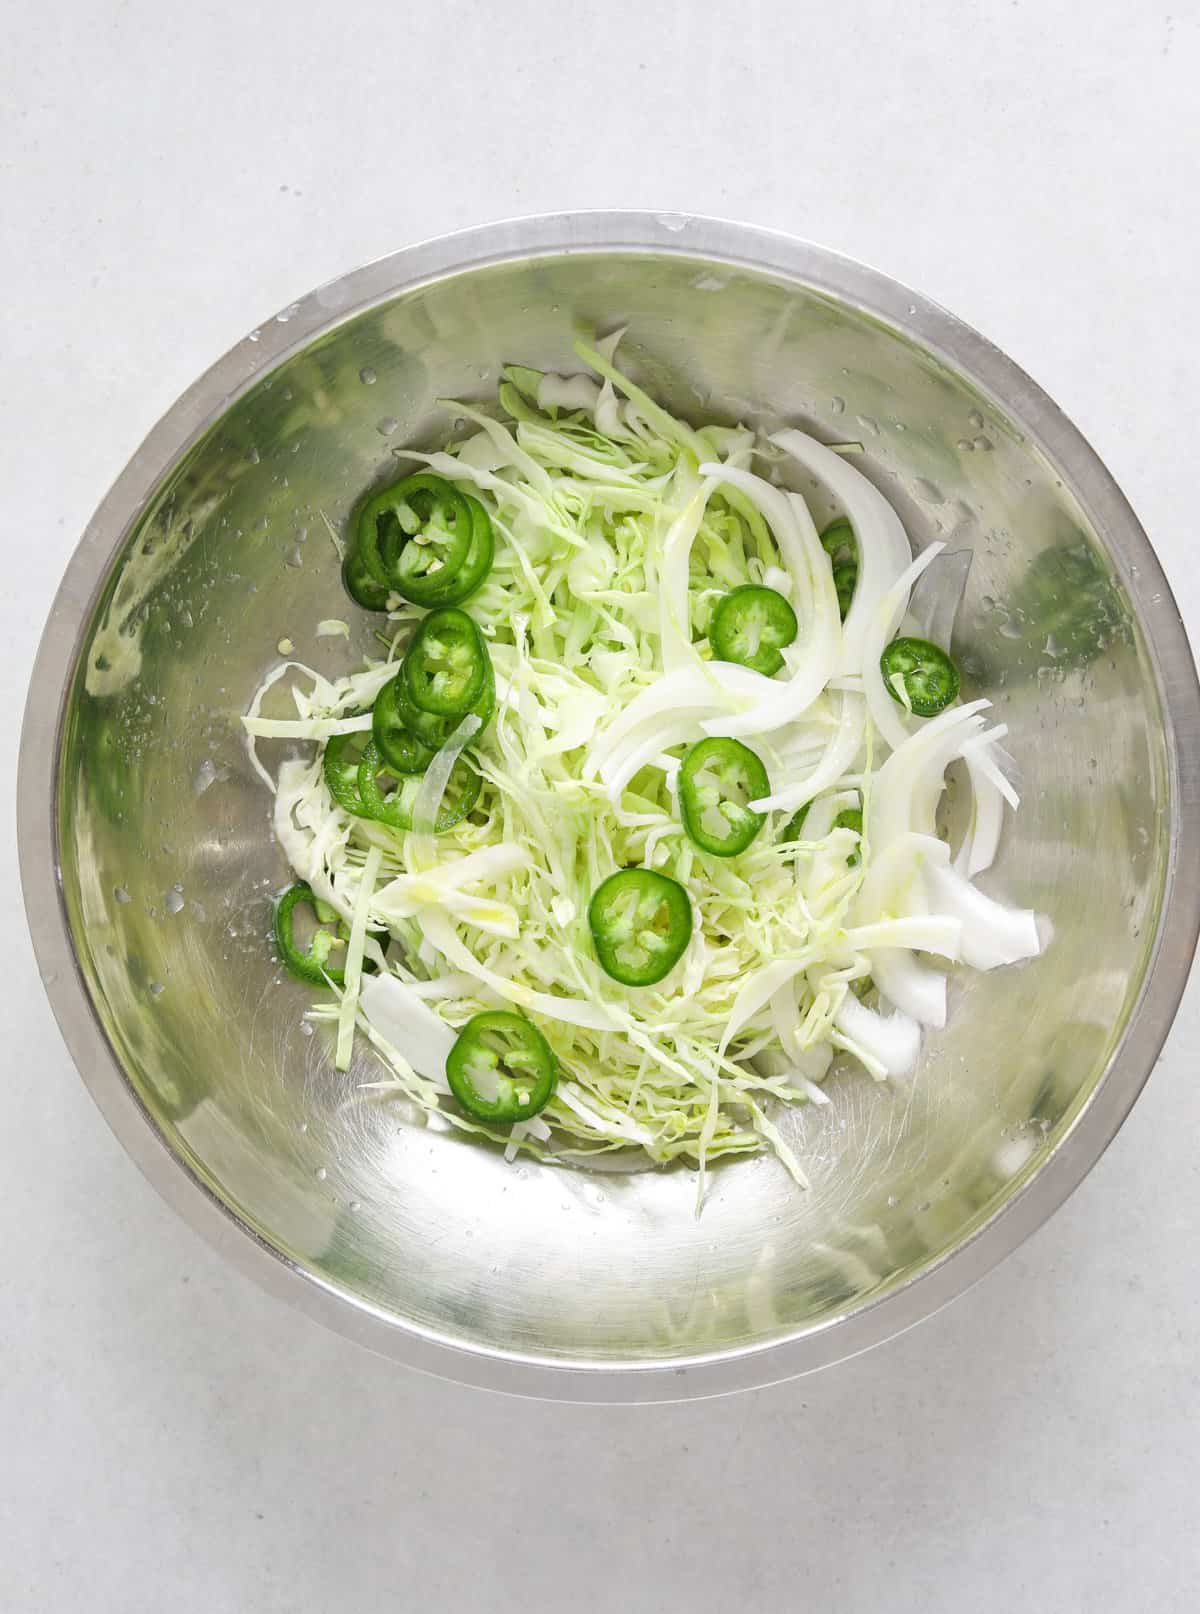 a stainless steel mixing bowl filled with shredded cabbage and sliced jalapeño.